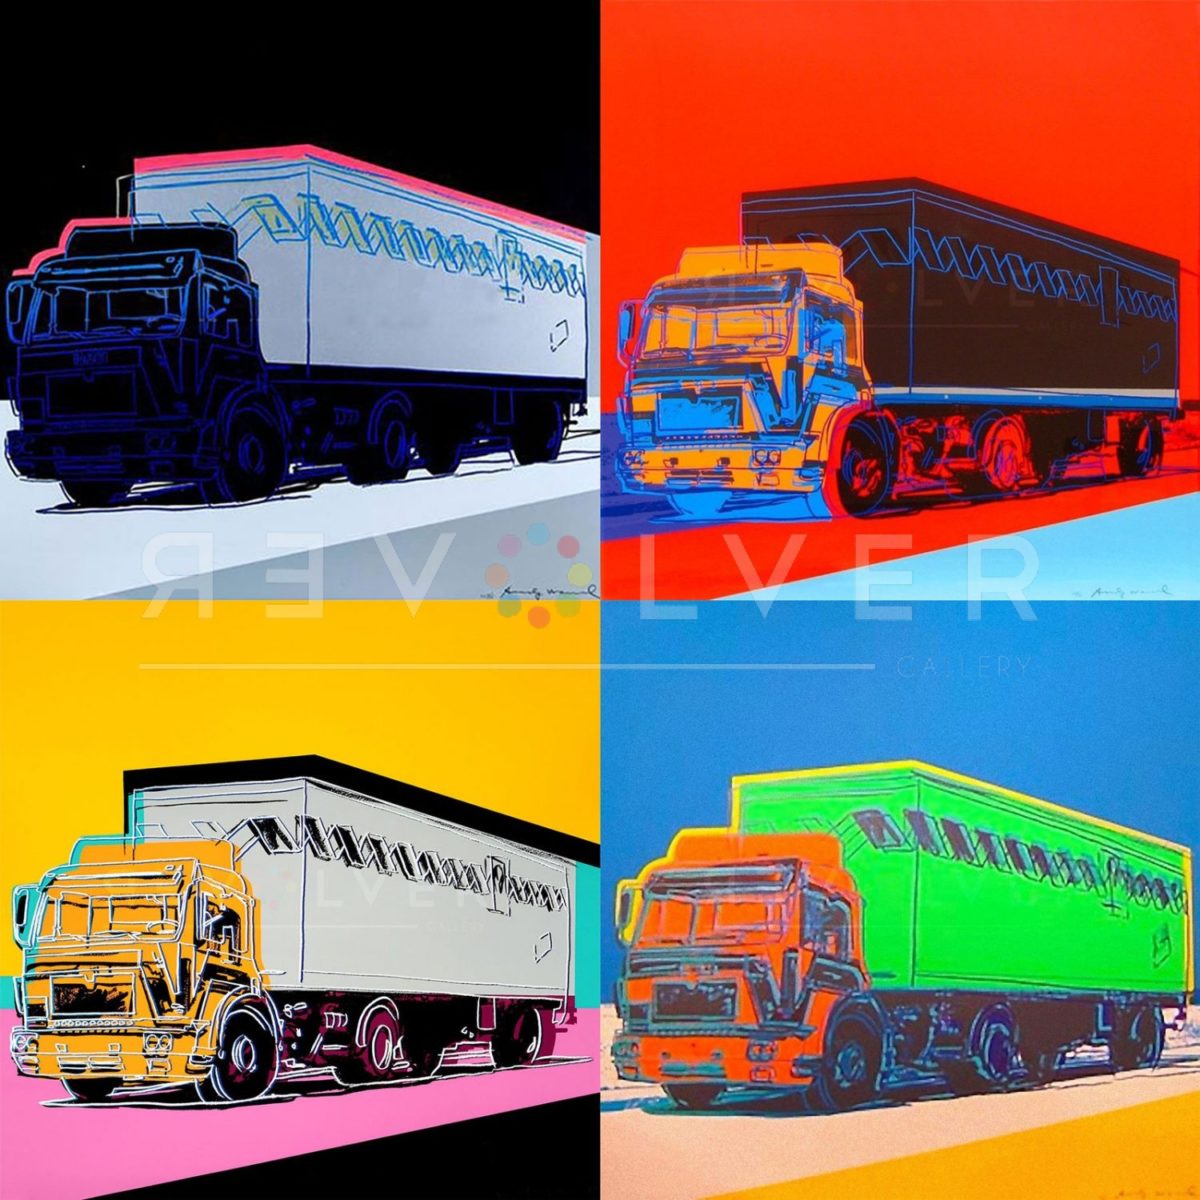 Andy Warhol Truck complete portfolio, all four prints in a grid with the revolver gallery watermark.